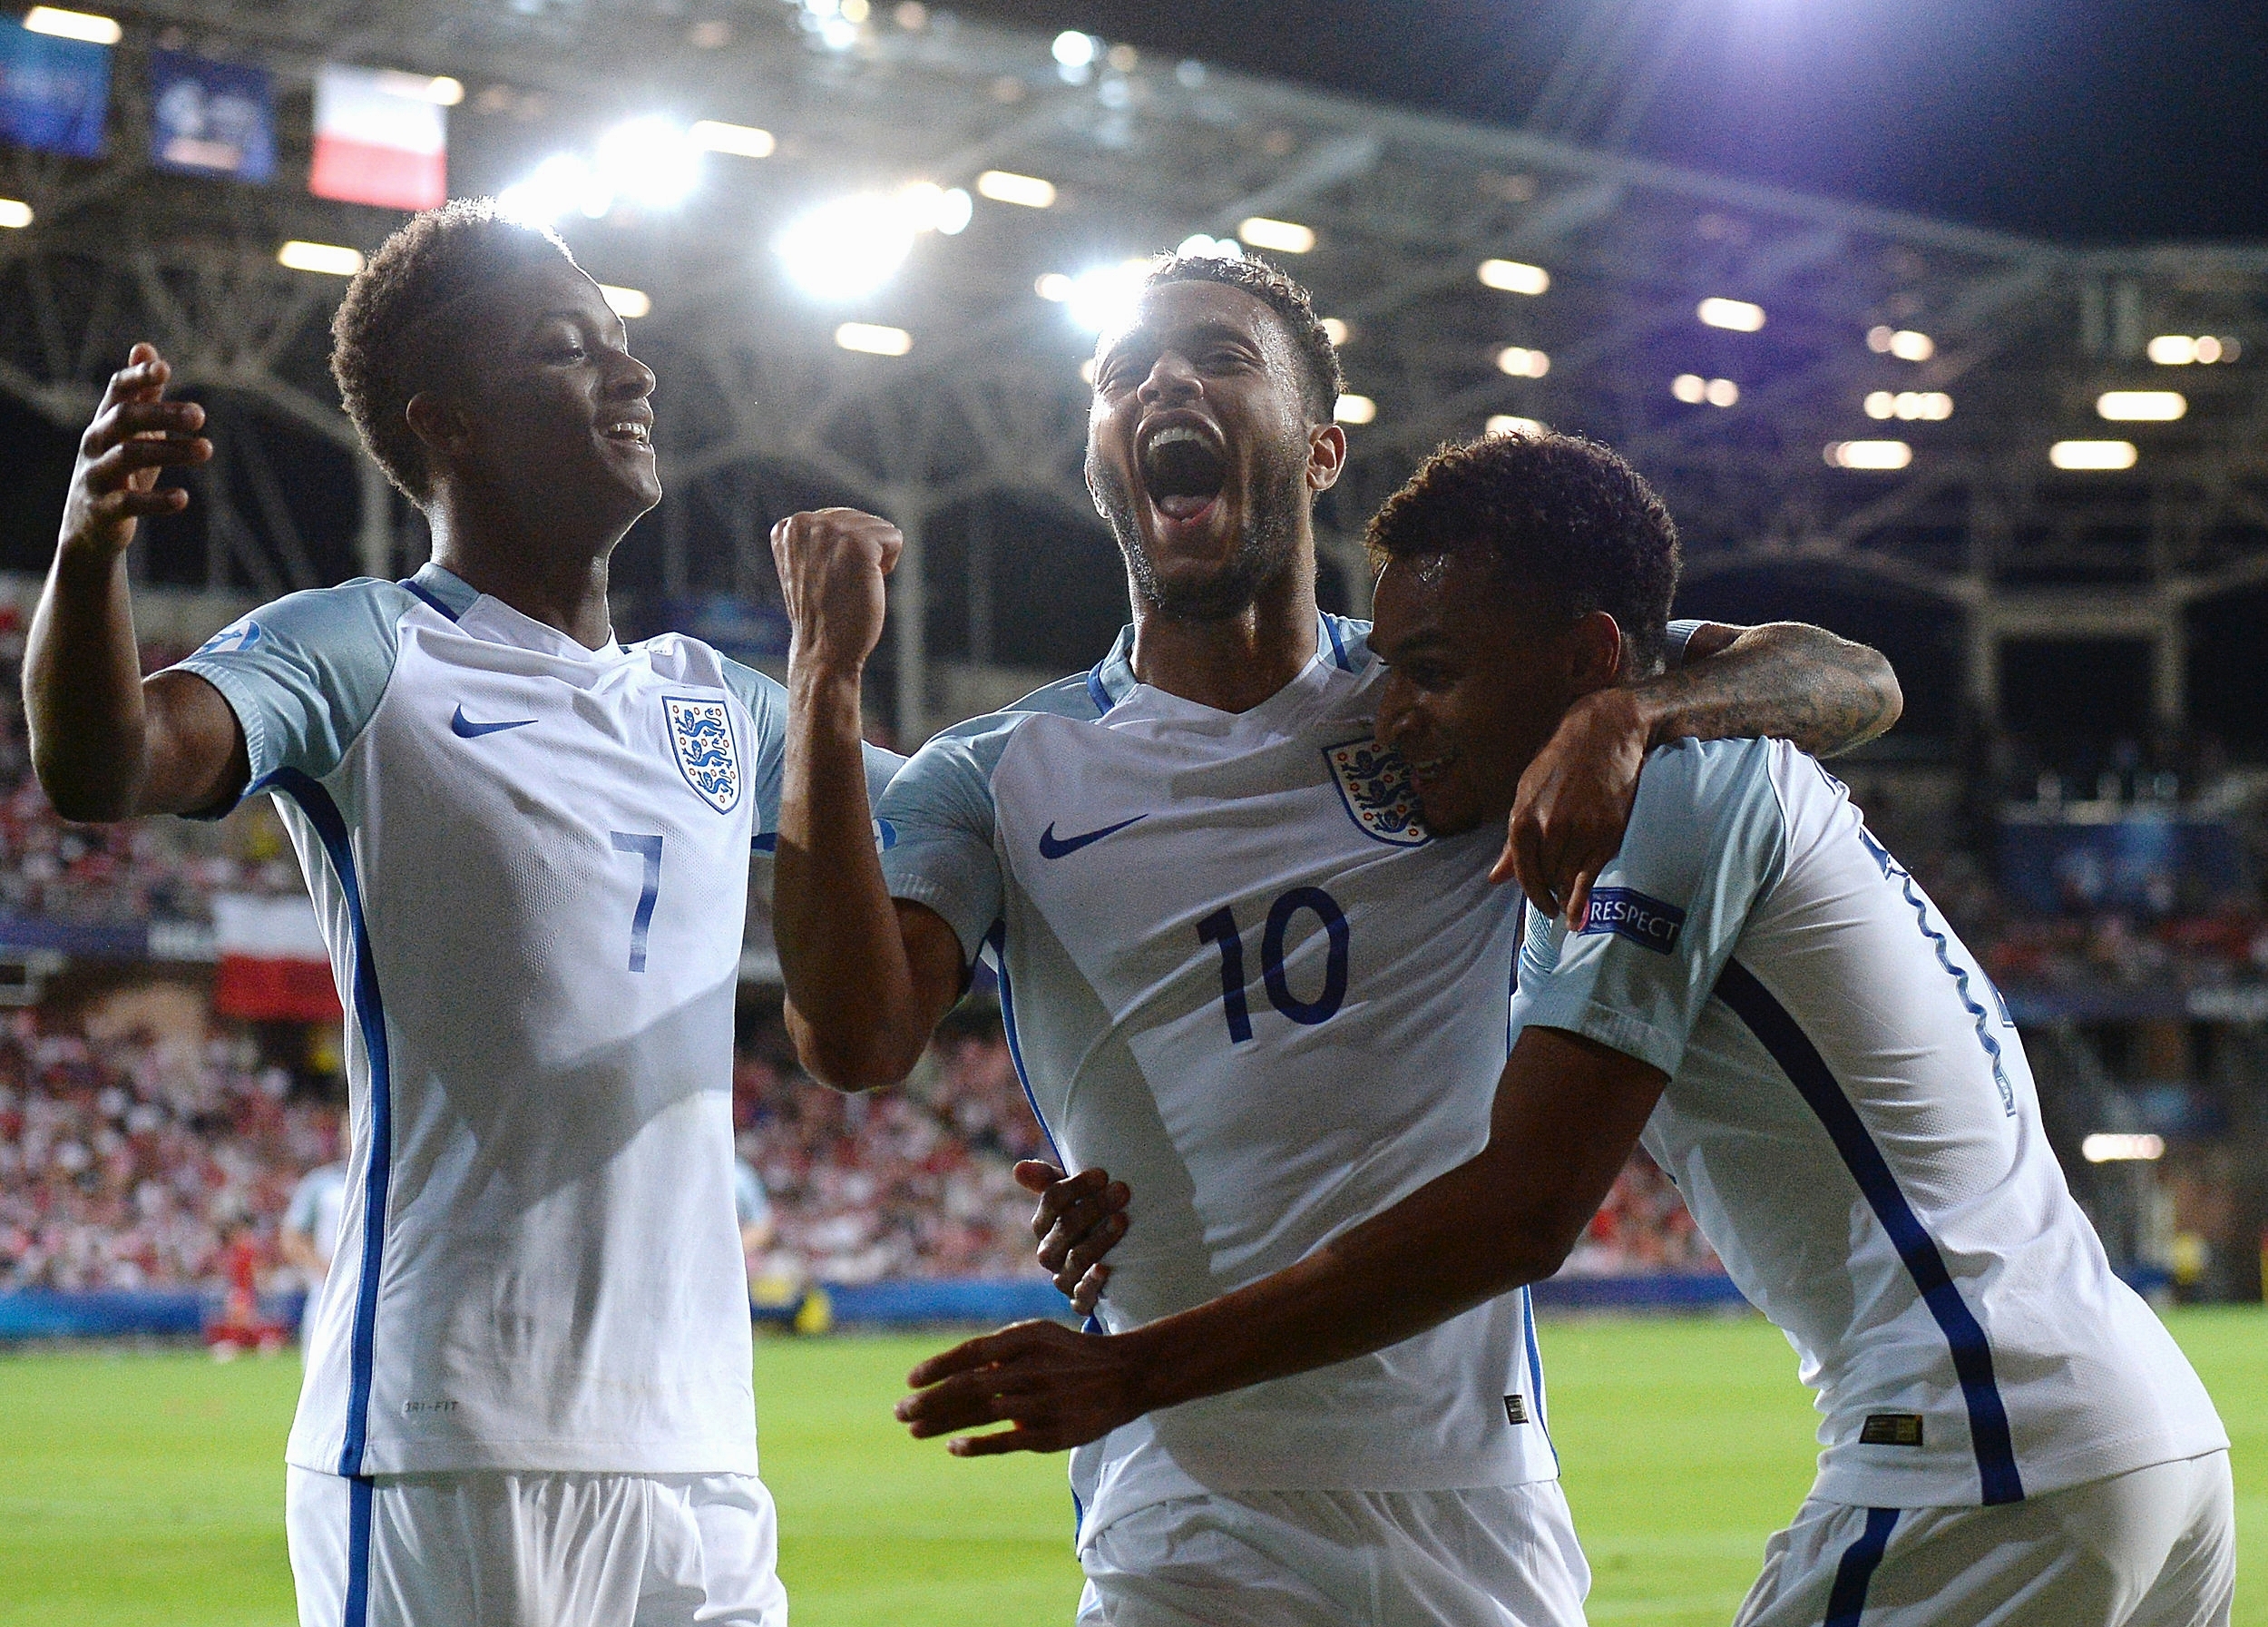  Jacob Murphy, right, of England celebrates with team-mates Demarai Gray, left, and Lewis Baker after scoring his side's second goal against Poland in Poland 2017 /  UEFA / Sportsfile  